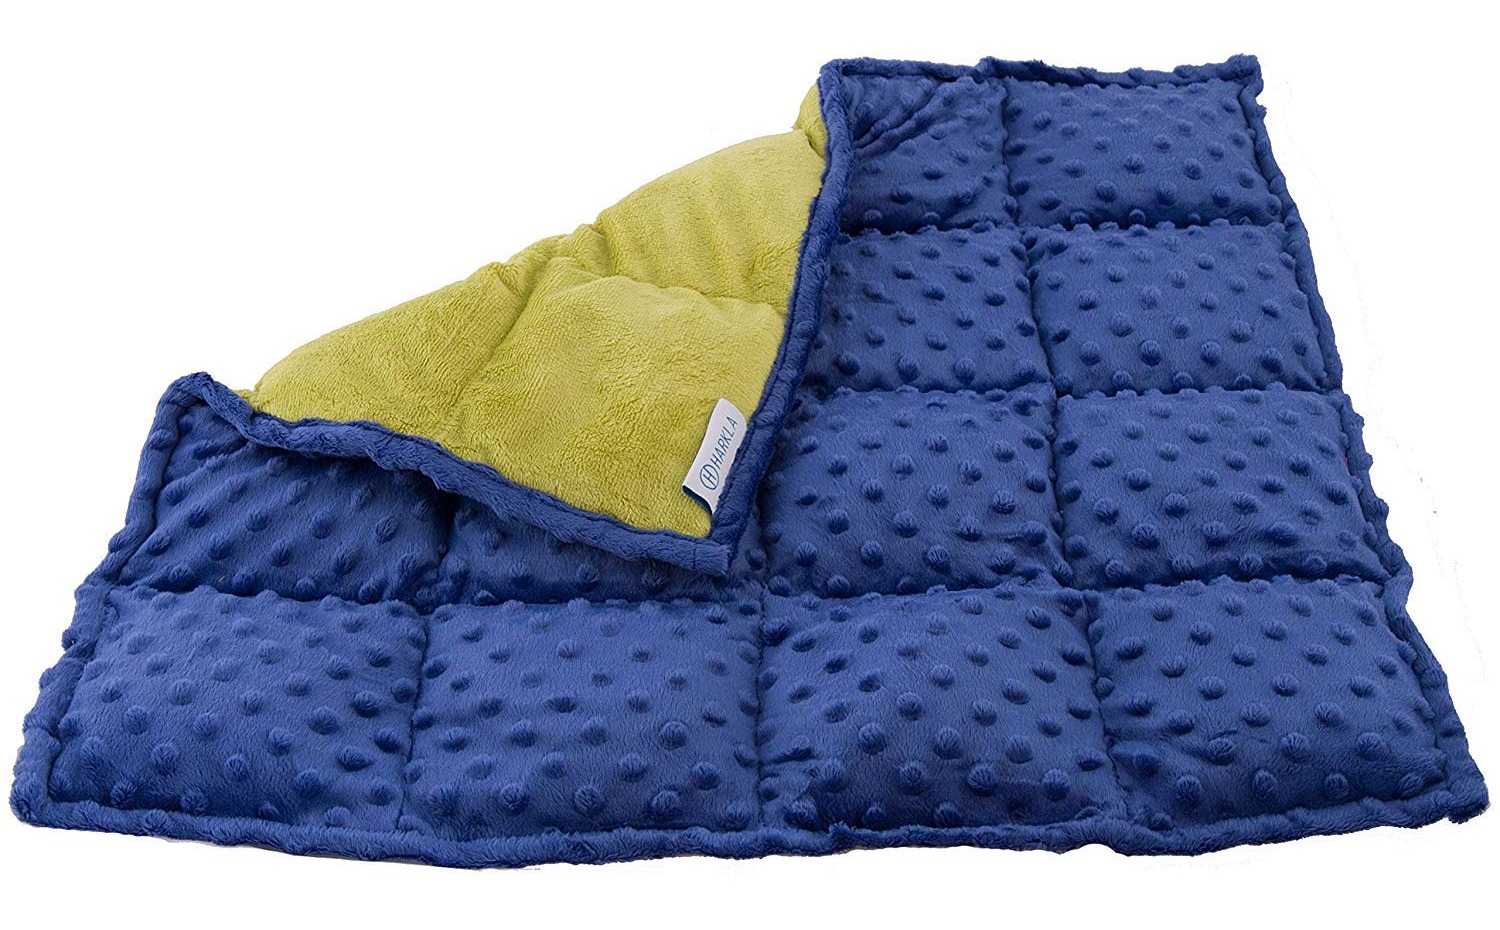 Blue and yellow weighted lap pad